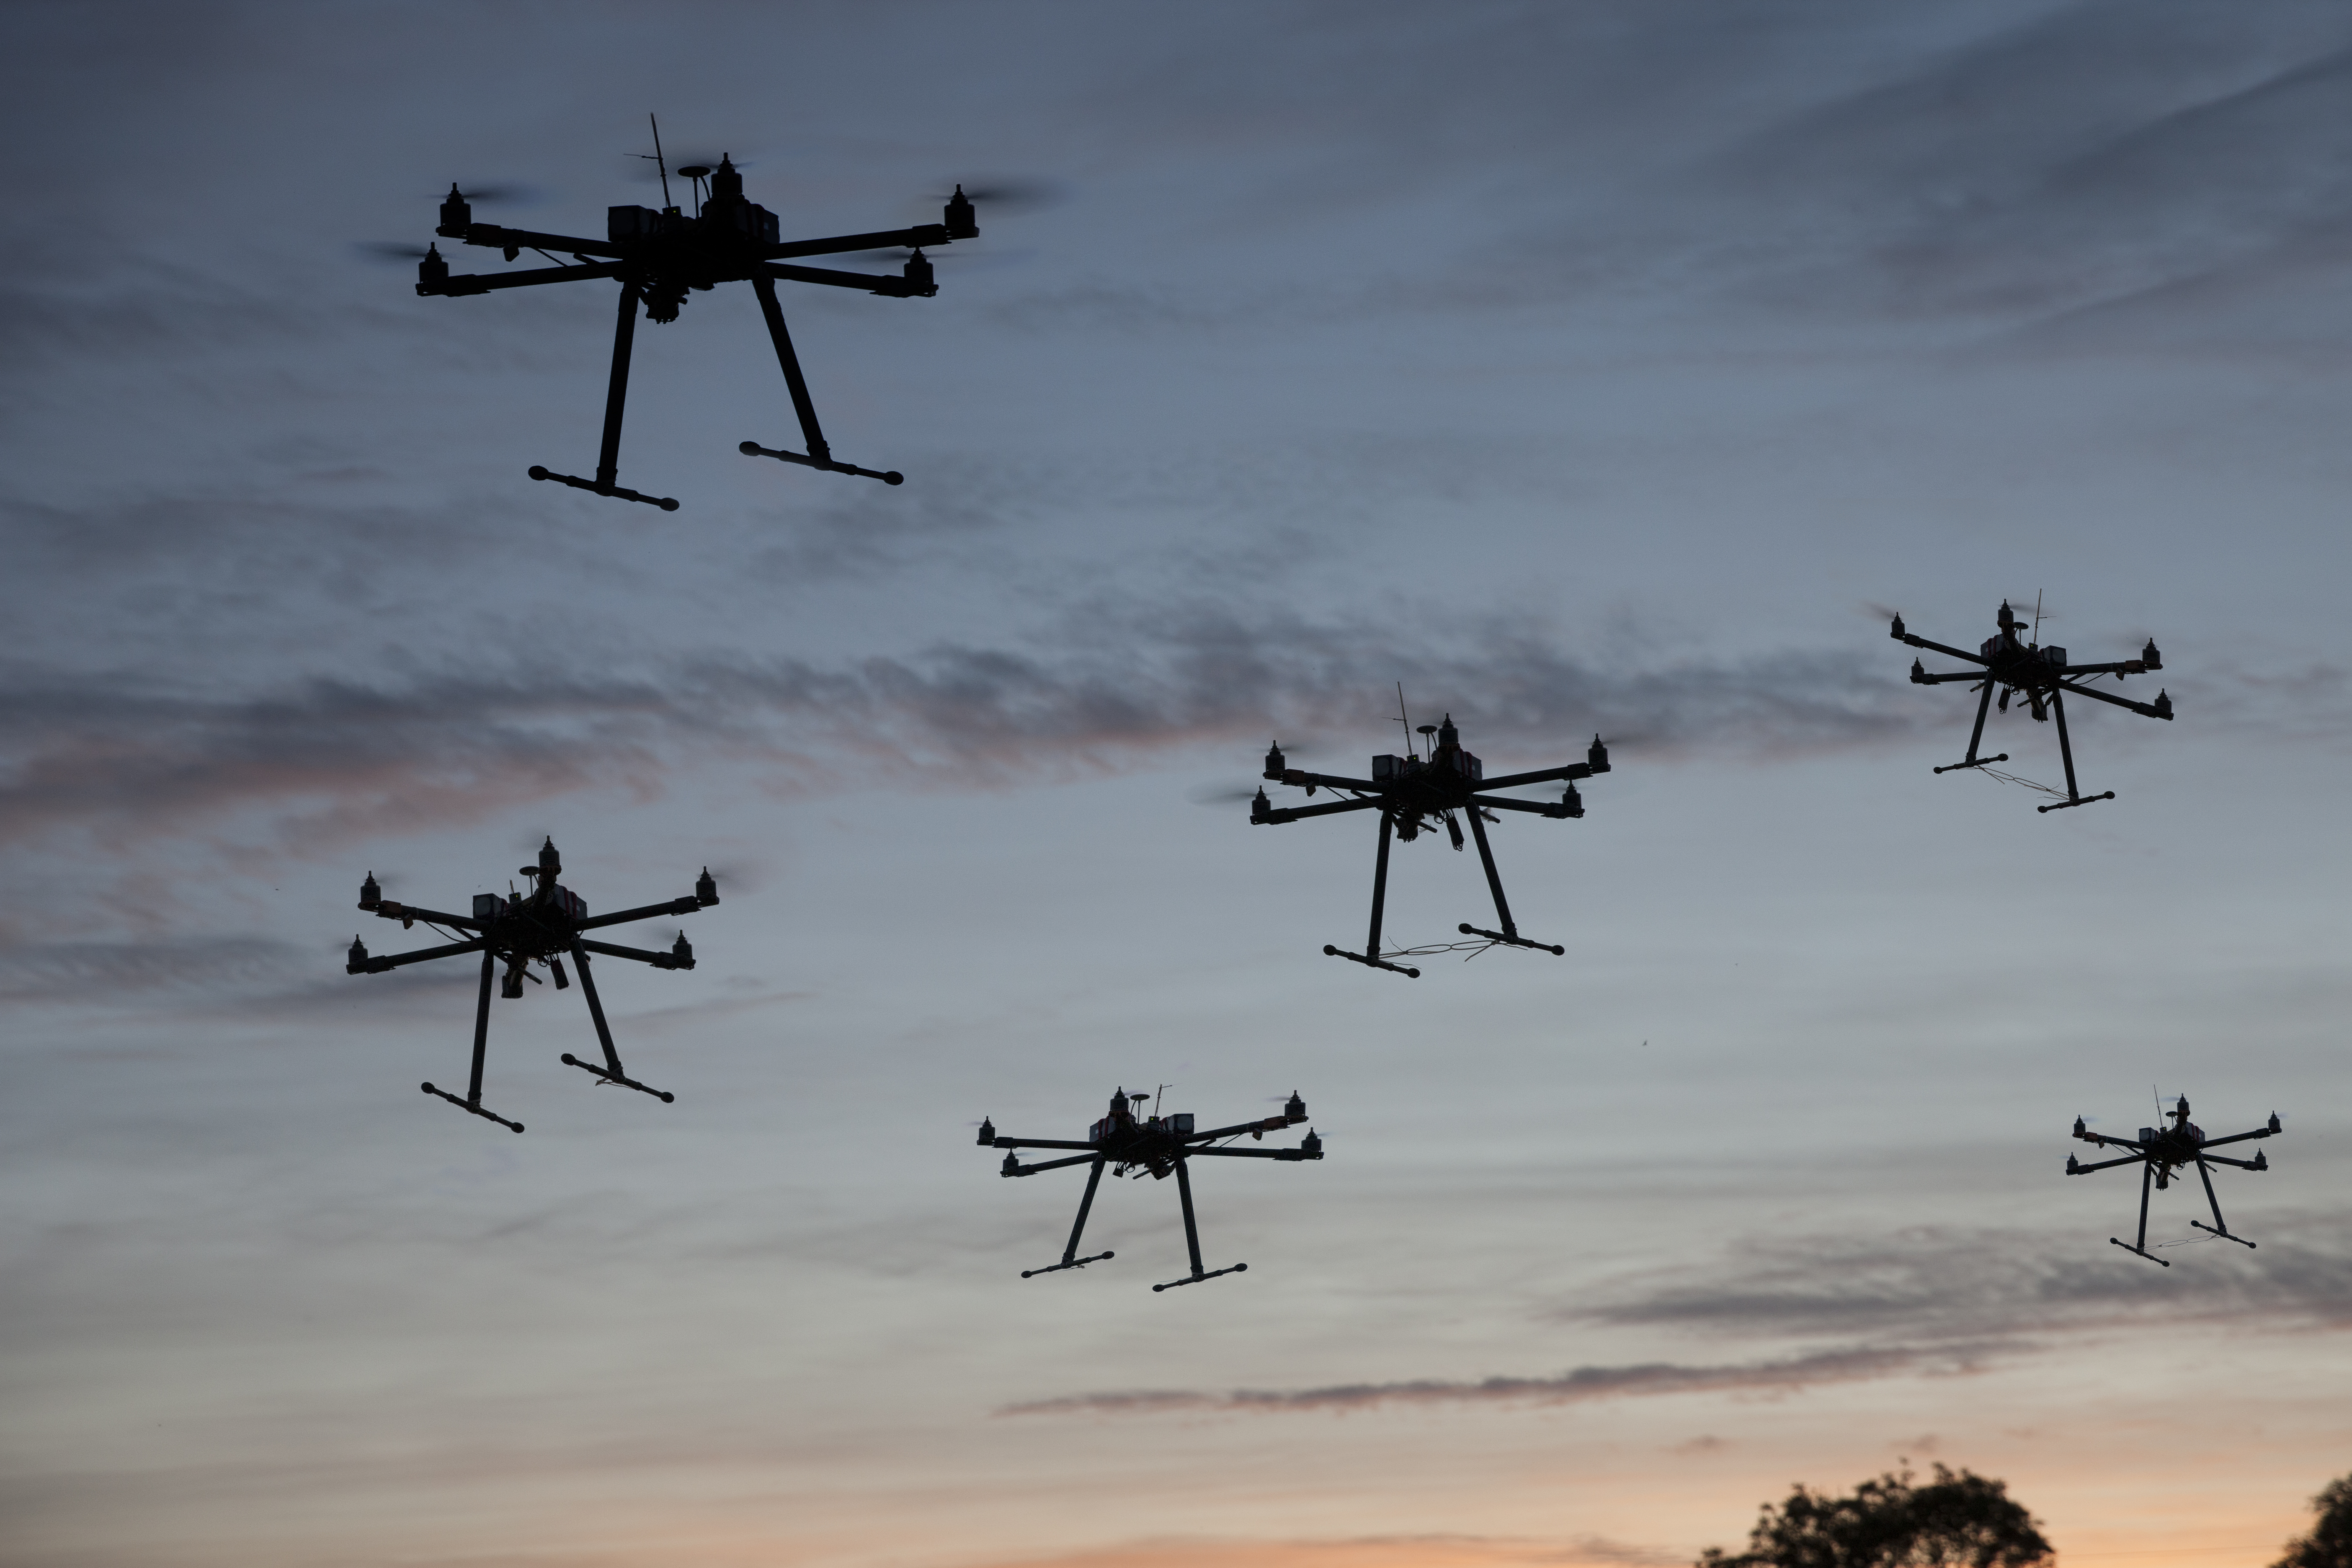 cloud for use, drone swarm nearly there, British air chief